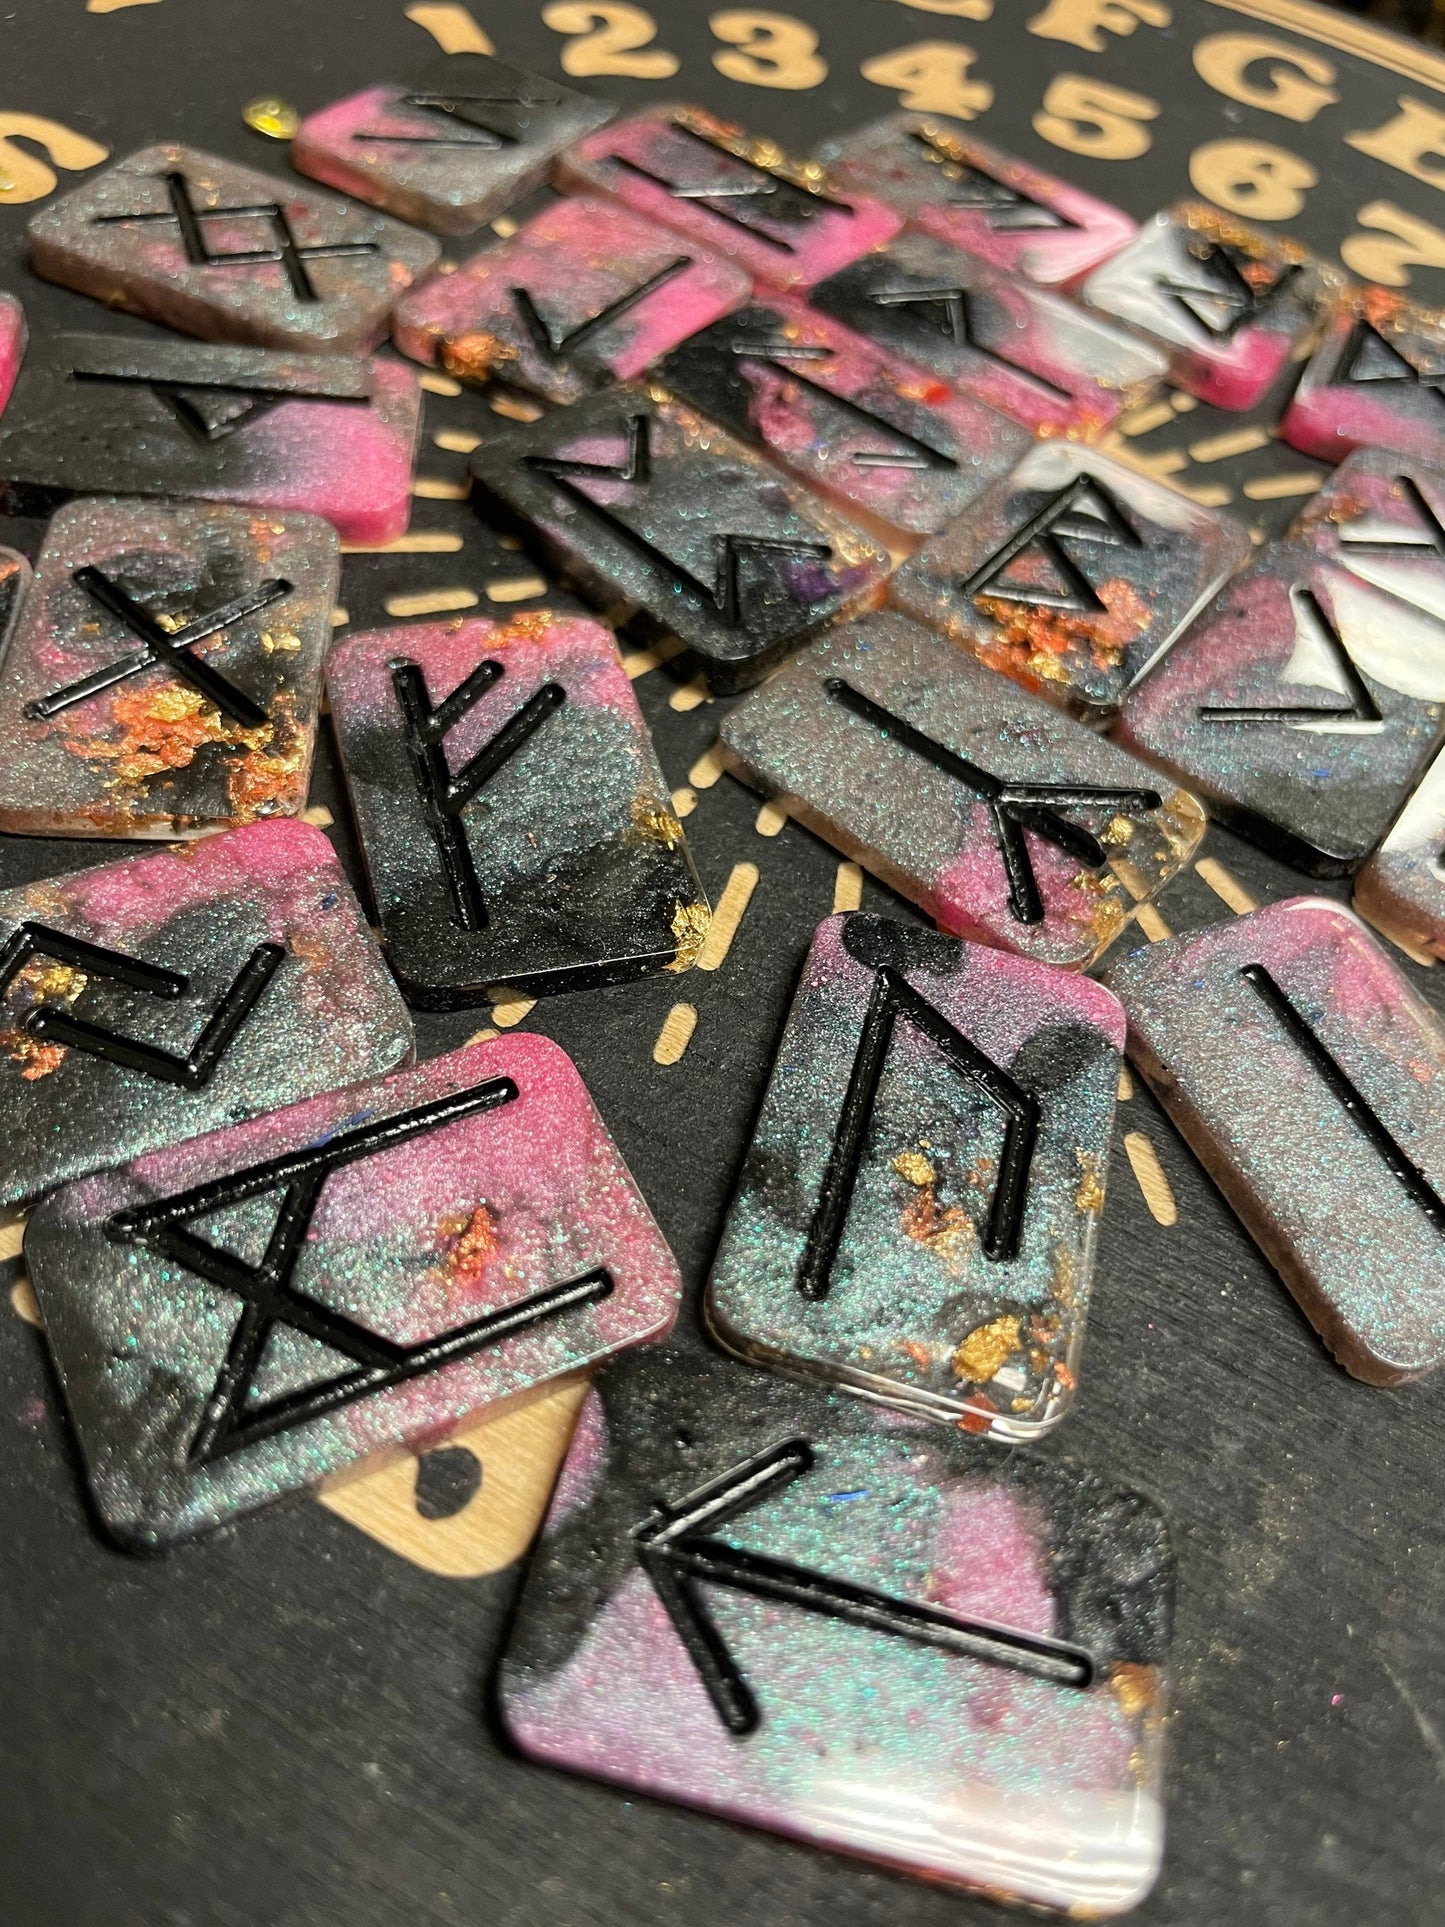 Pink & Black/Silver with Gold Flakes Rune Tile Set, 25 pc - Black Letters - Made to Order